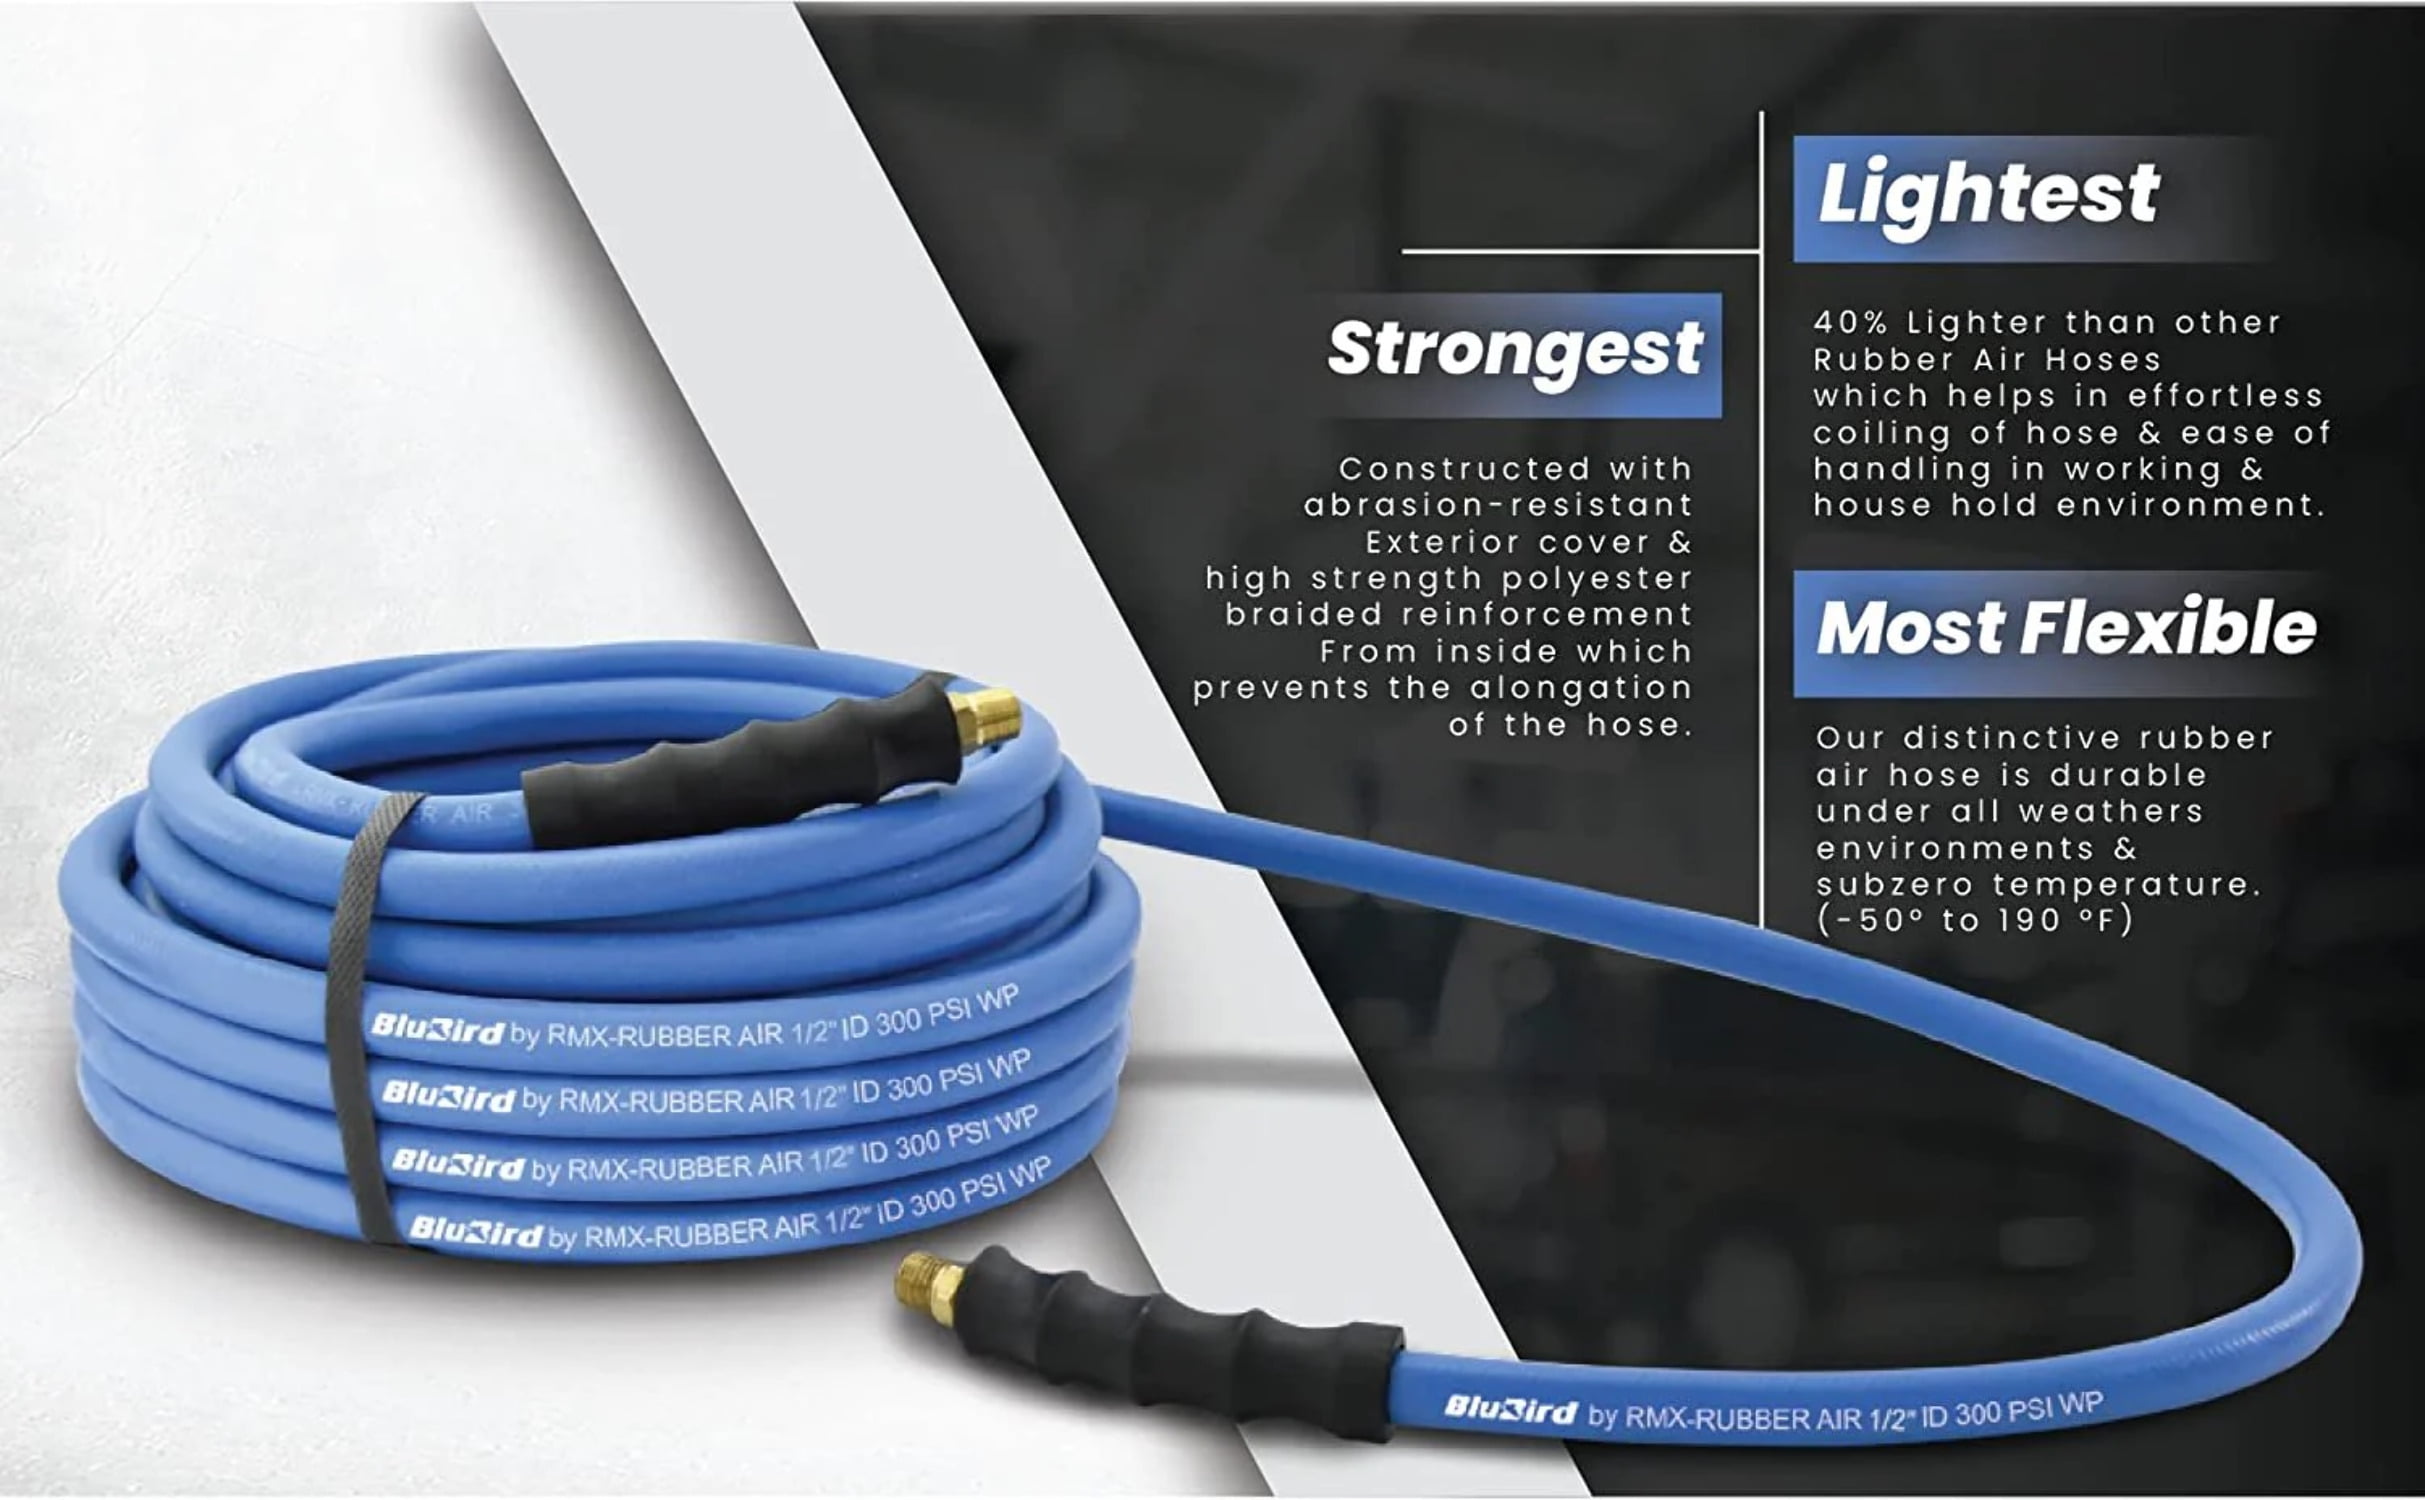 BLUBIRD BB3450 3/4 x 50' Rubber Air Hose, 100% Rubber, Lightest,  Strongest, Most Flexible, 300 PSI, -50F to 190F Degrees, Ozone Resistant,  High Strength Polyester Braided 